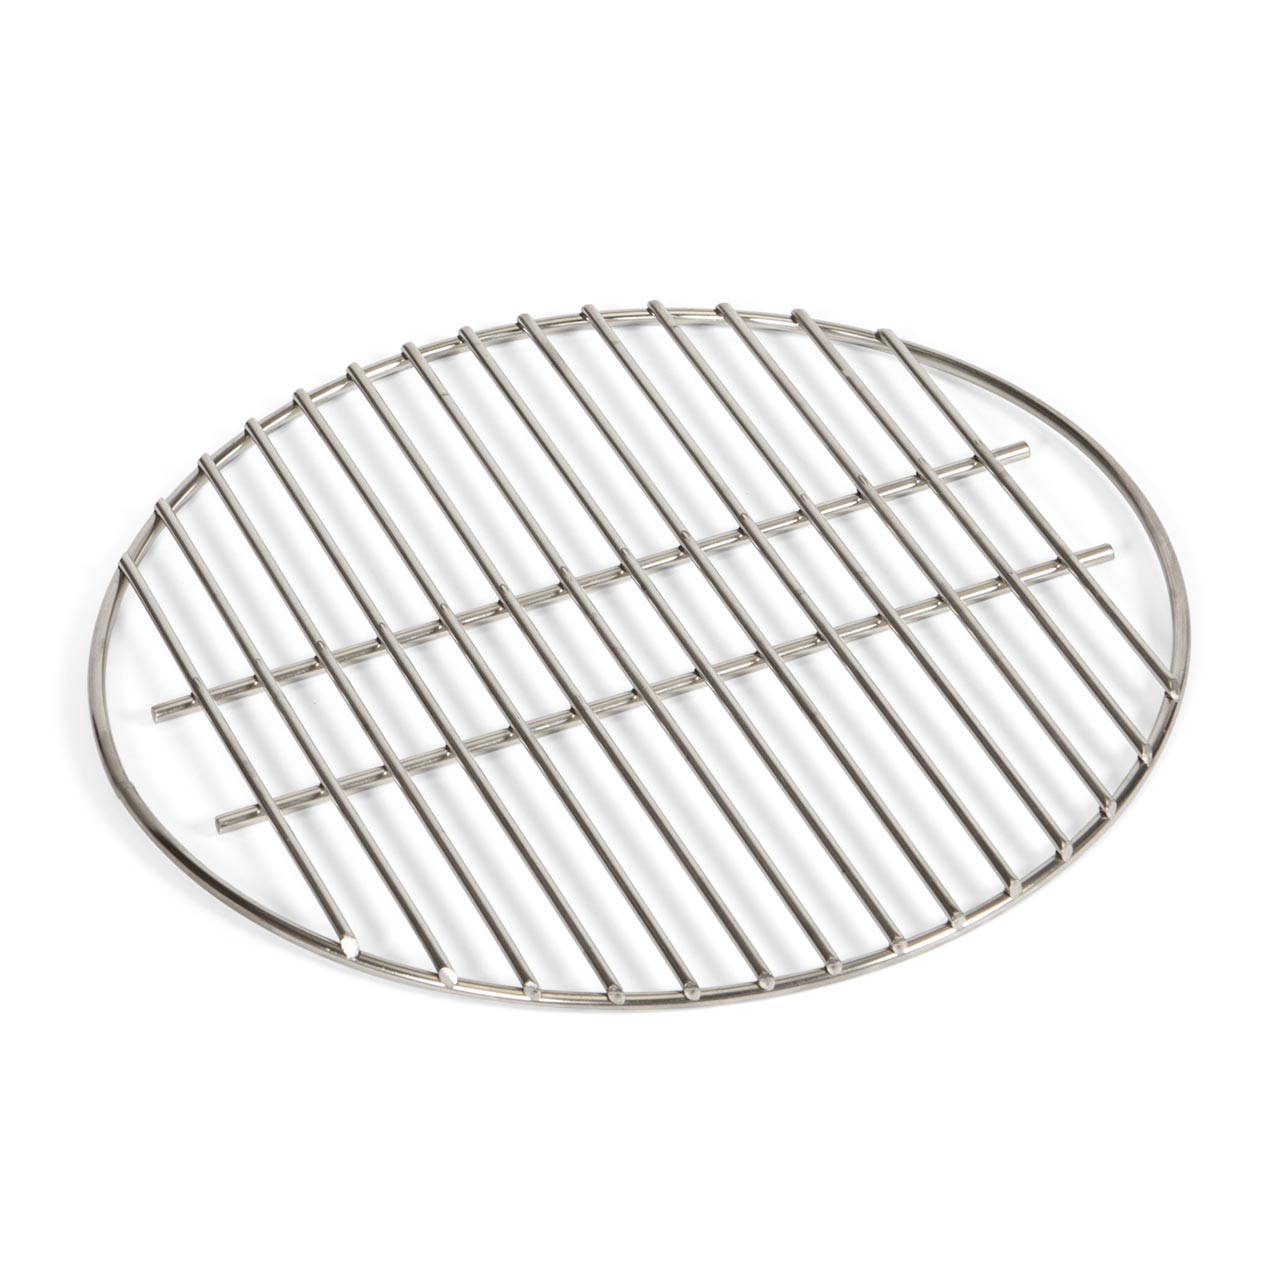 Grill grate made of stainless steel 2XL